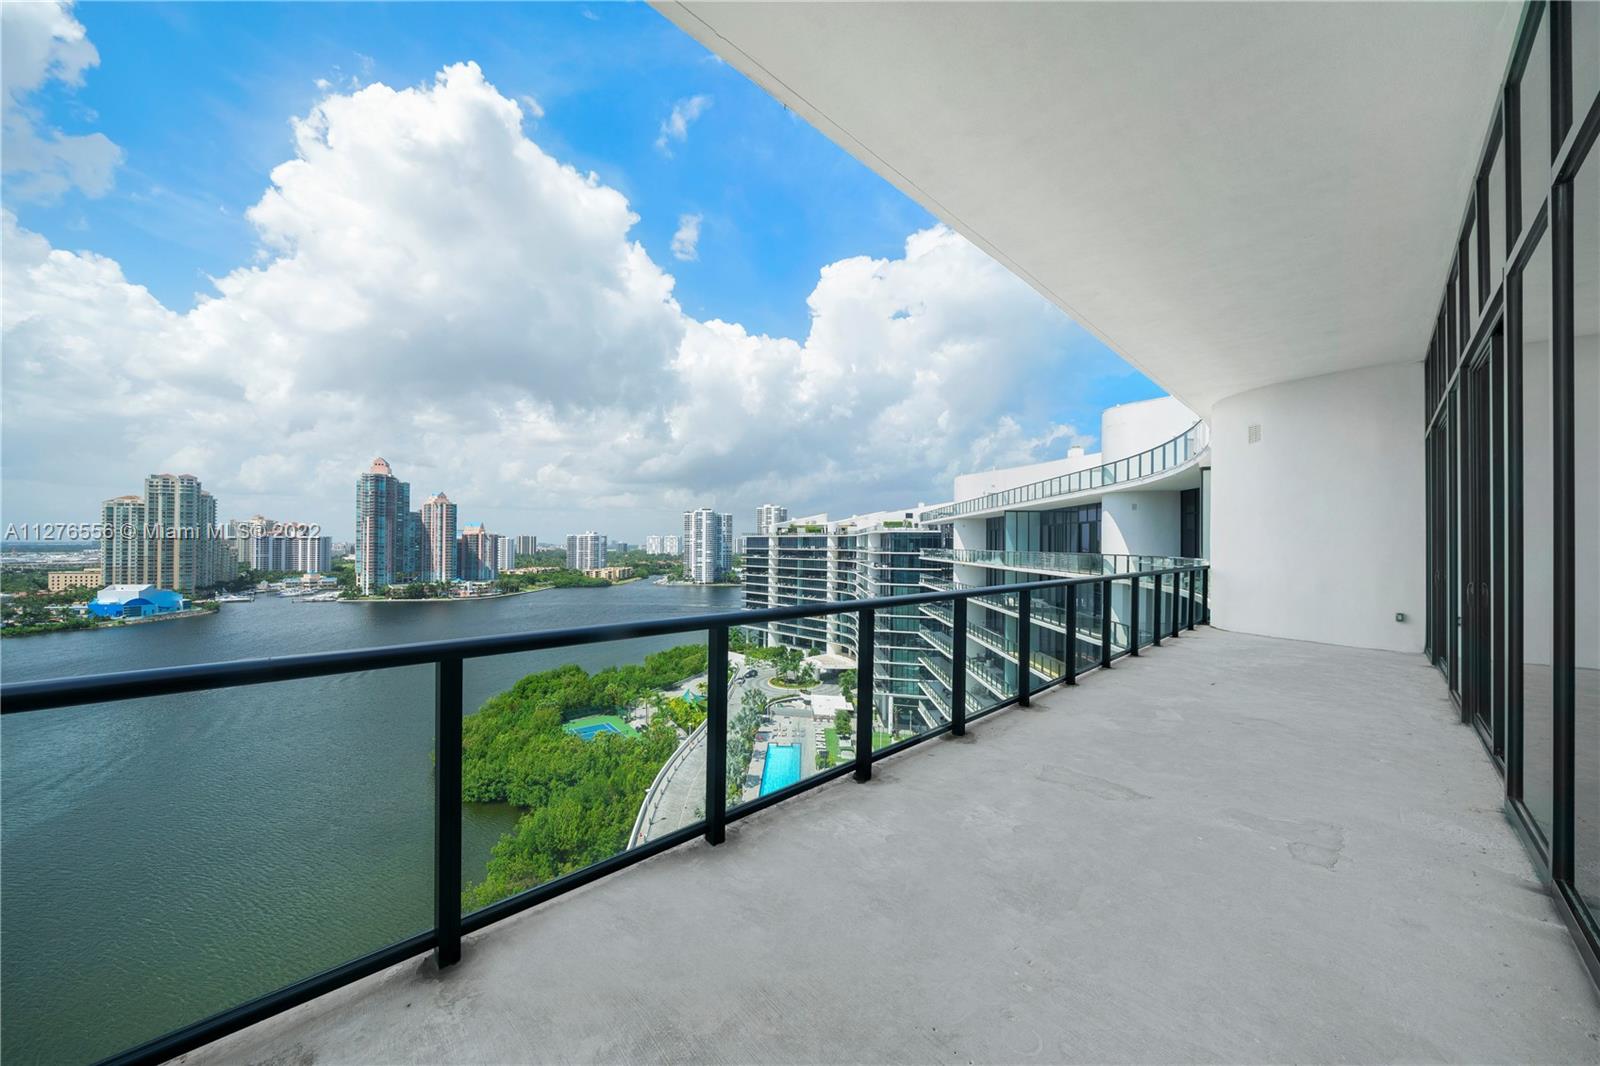 Photo 42 of Prive South Apt 1503 in Aventura - MLS A11276556